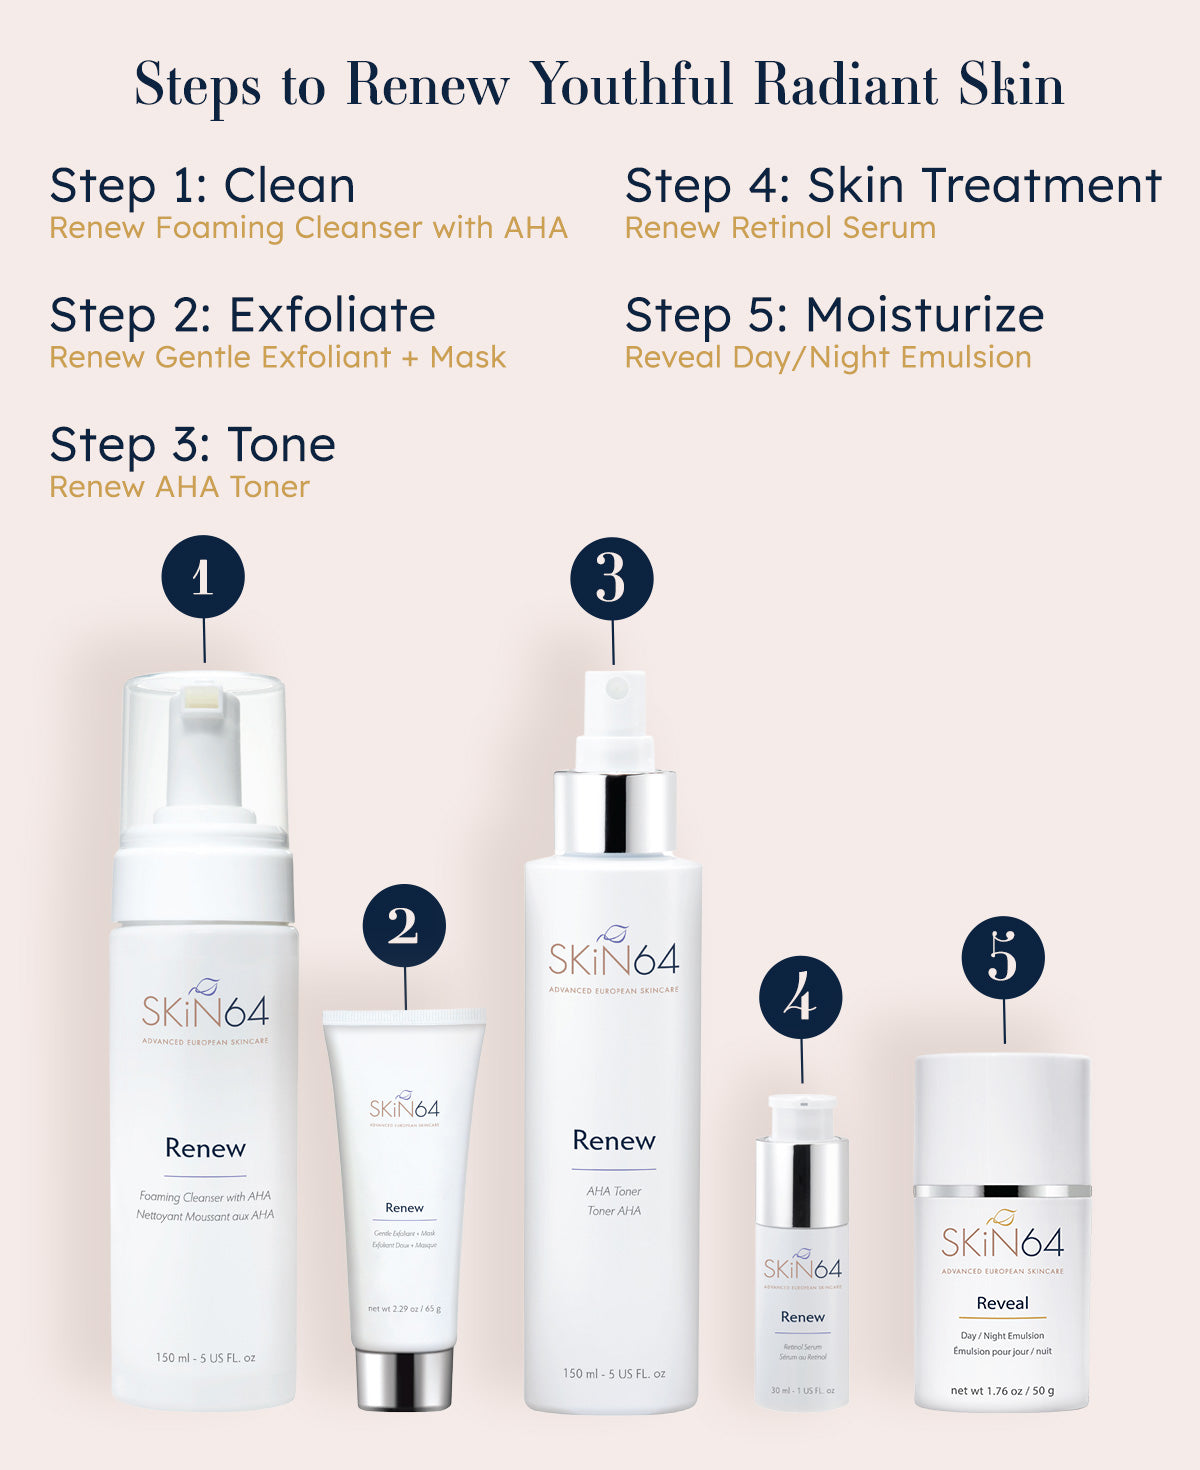 Steps to renew youthful skin: 1) Clean with Renew foaming cleanser, 2) Exfoliate with renew exfoliant/mask, 3) tone with Renew AHA facial toner, 4) apply Renew retinol serum, 5) Moisturize with Reveal day/night emulsion